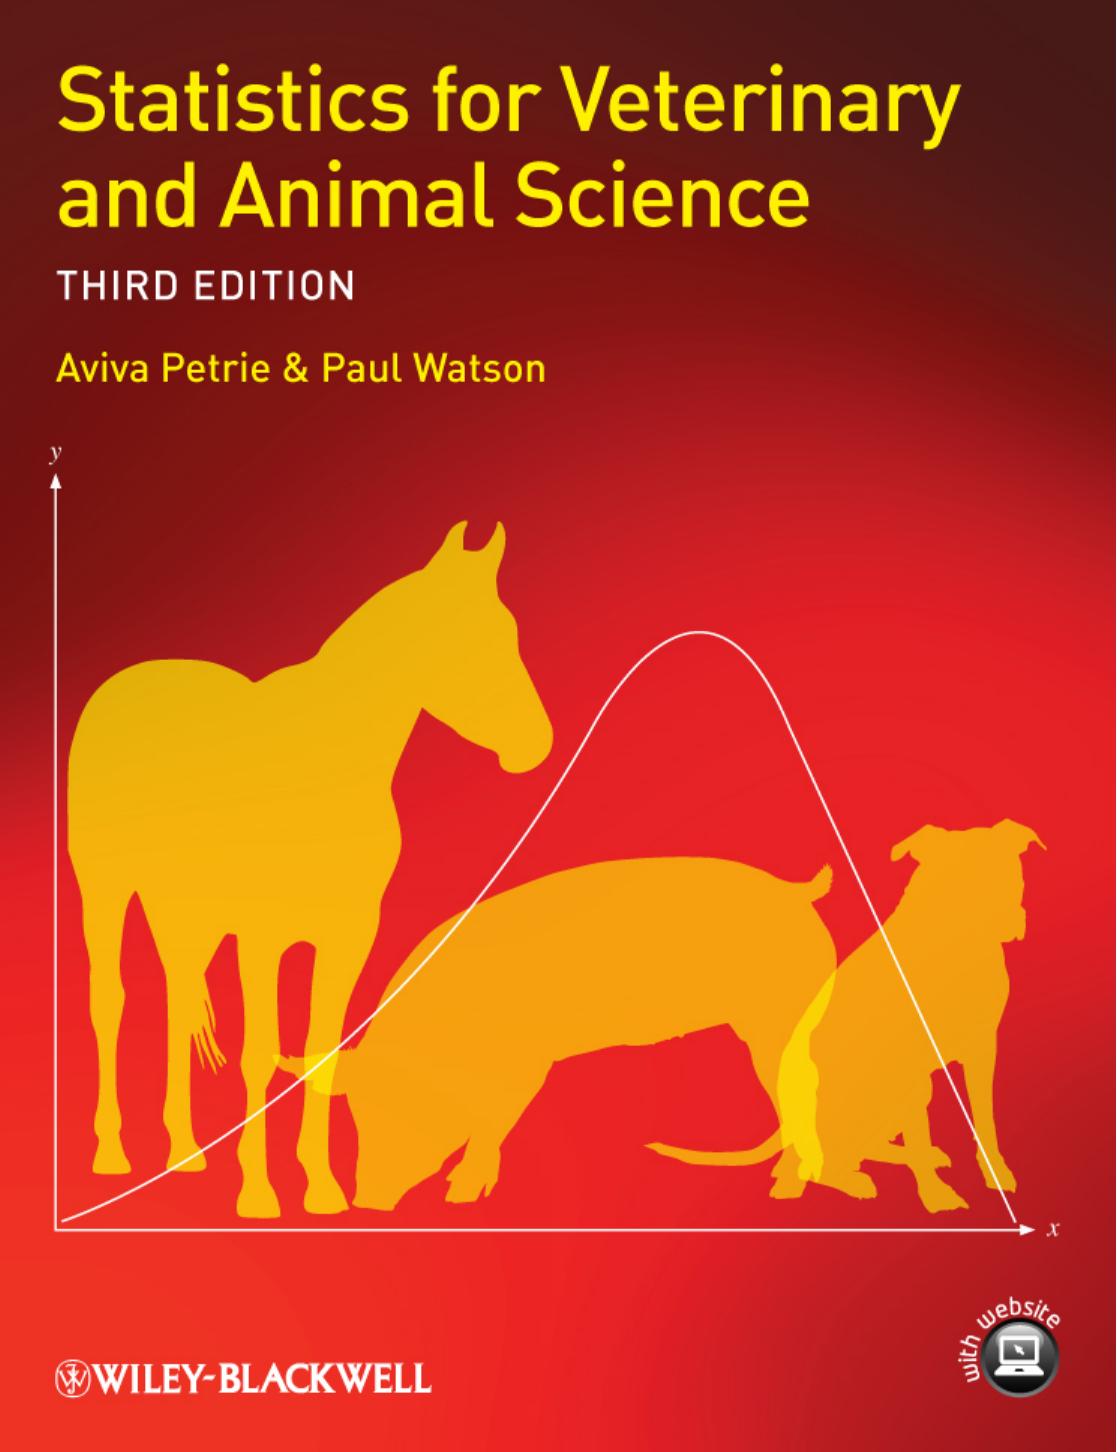 Statistics for Veterinary and Animal Science, Third Edition